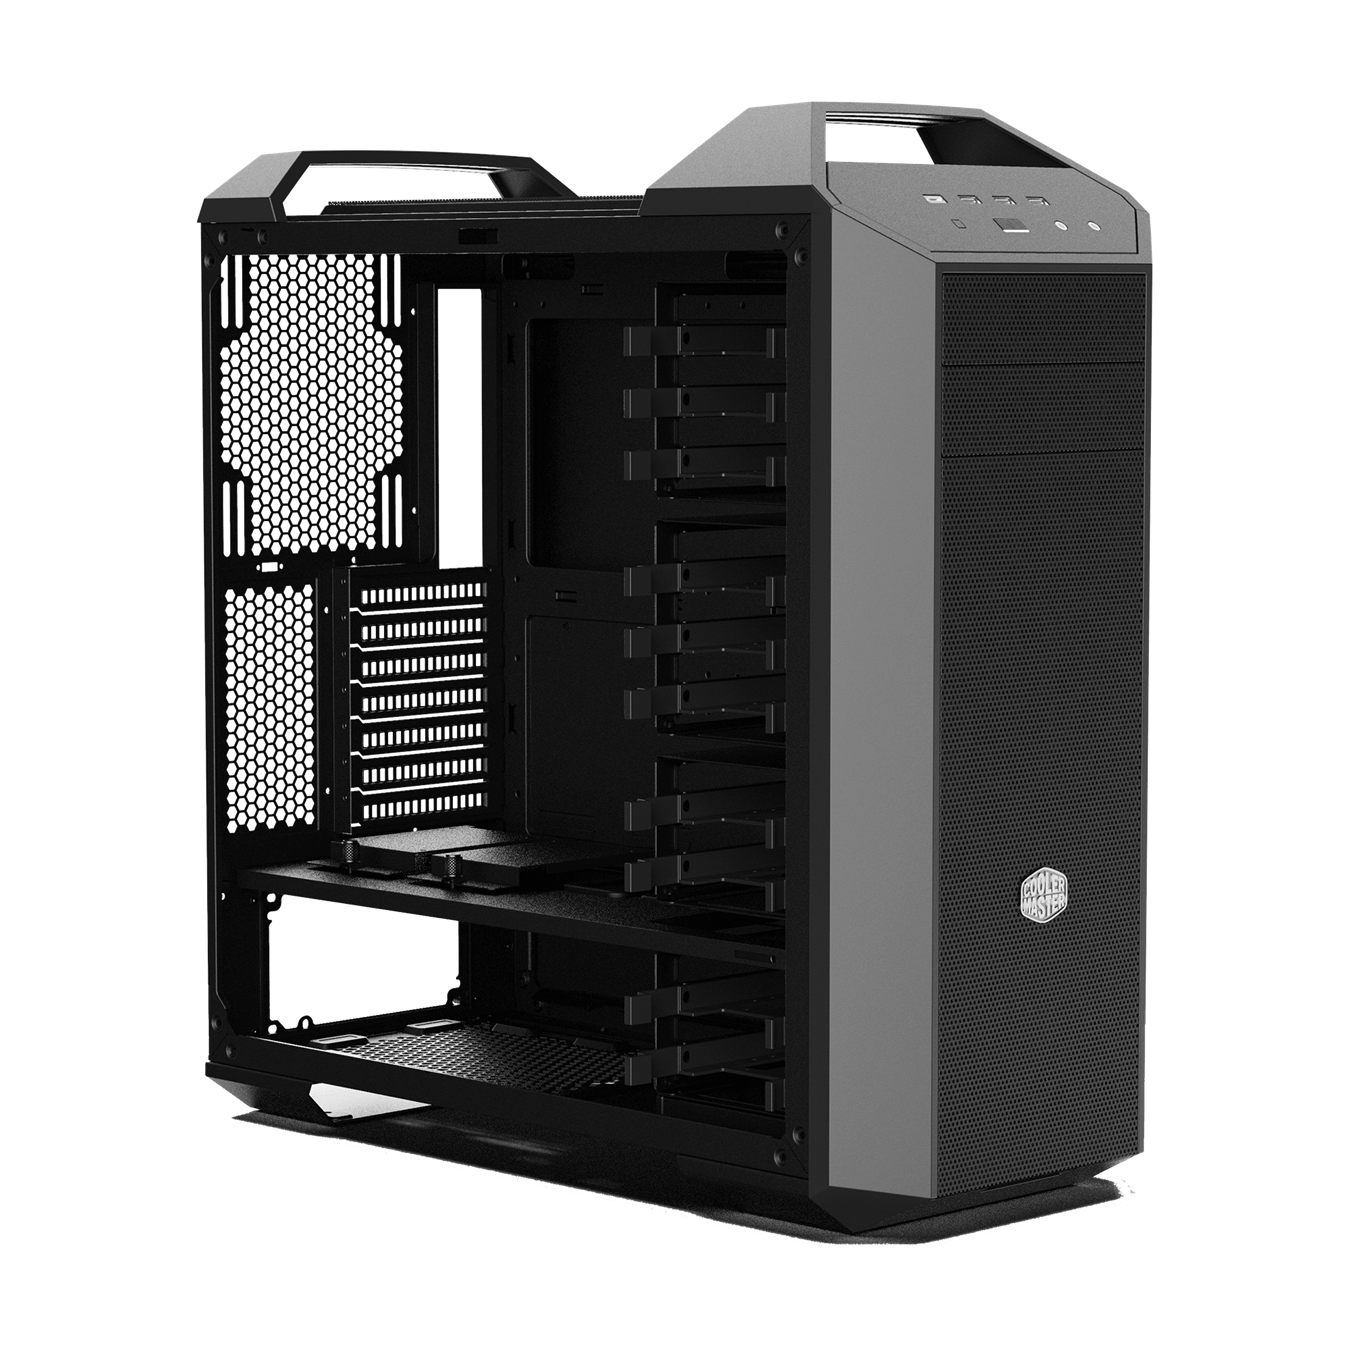 FreeForm™ Modular System is easily customize, adjust, and upgrade your case, inside and out.